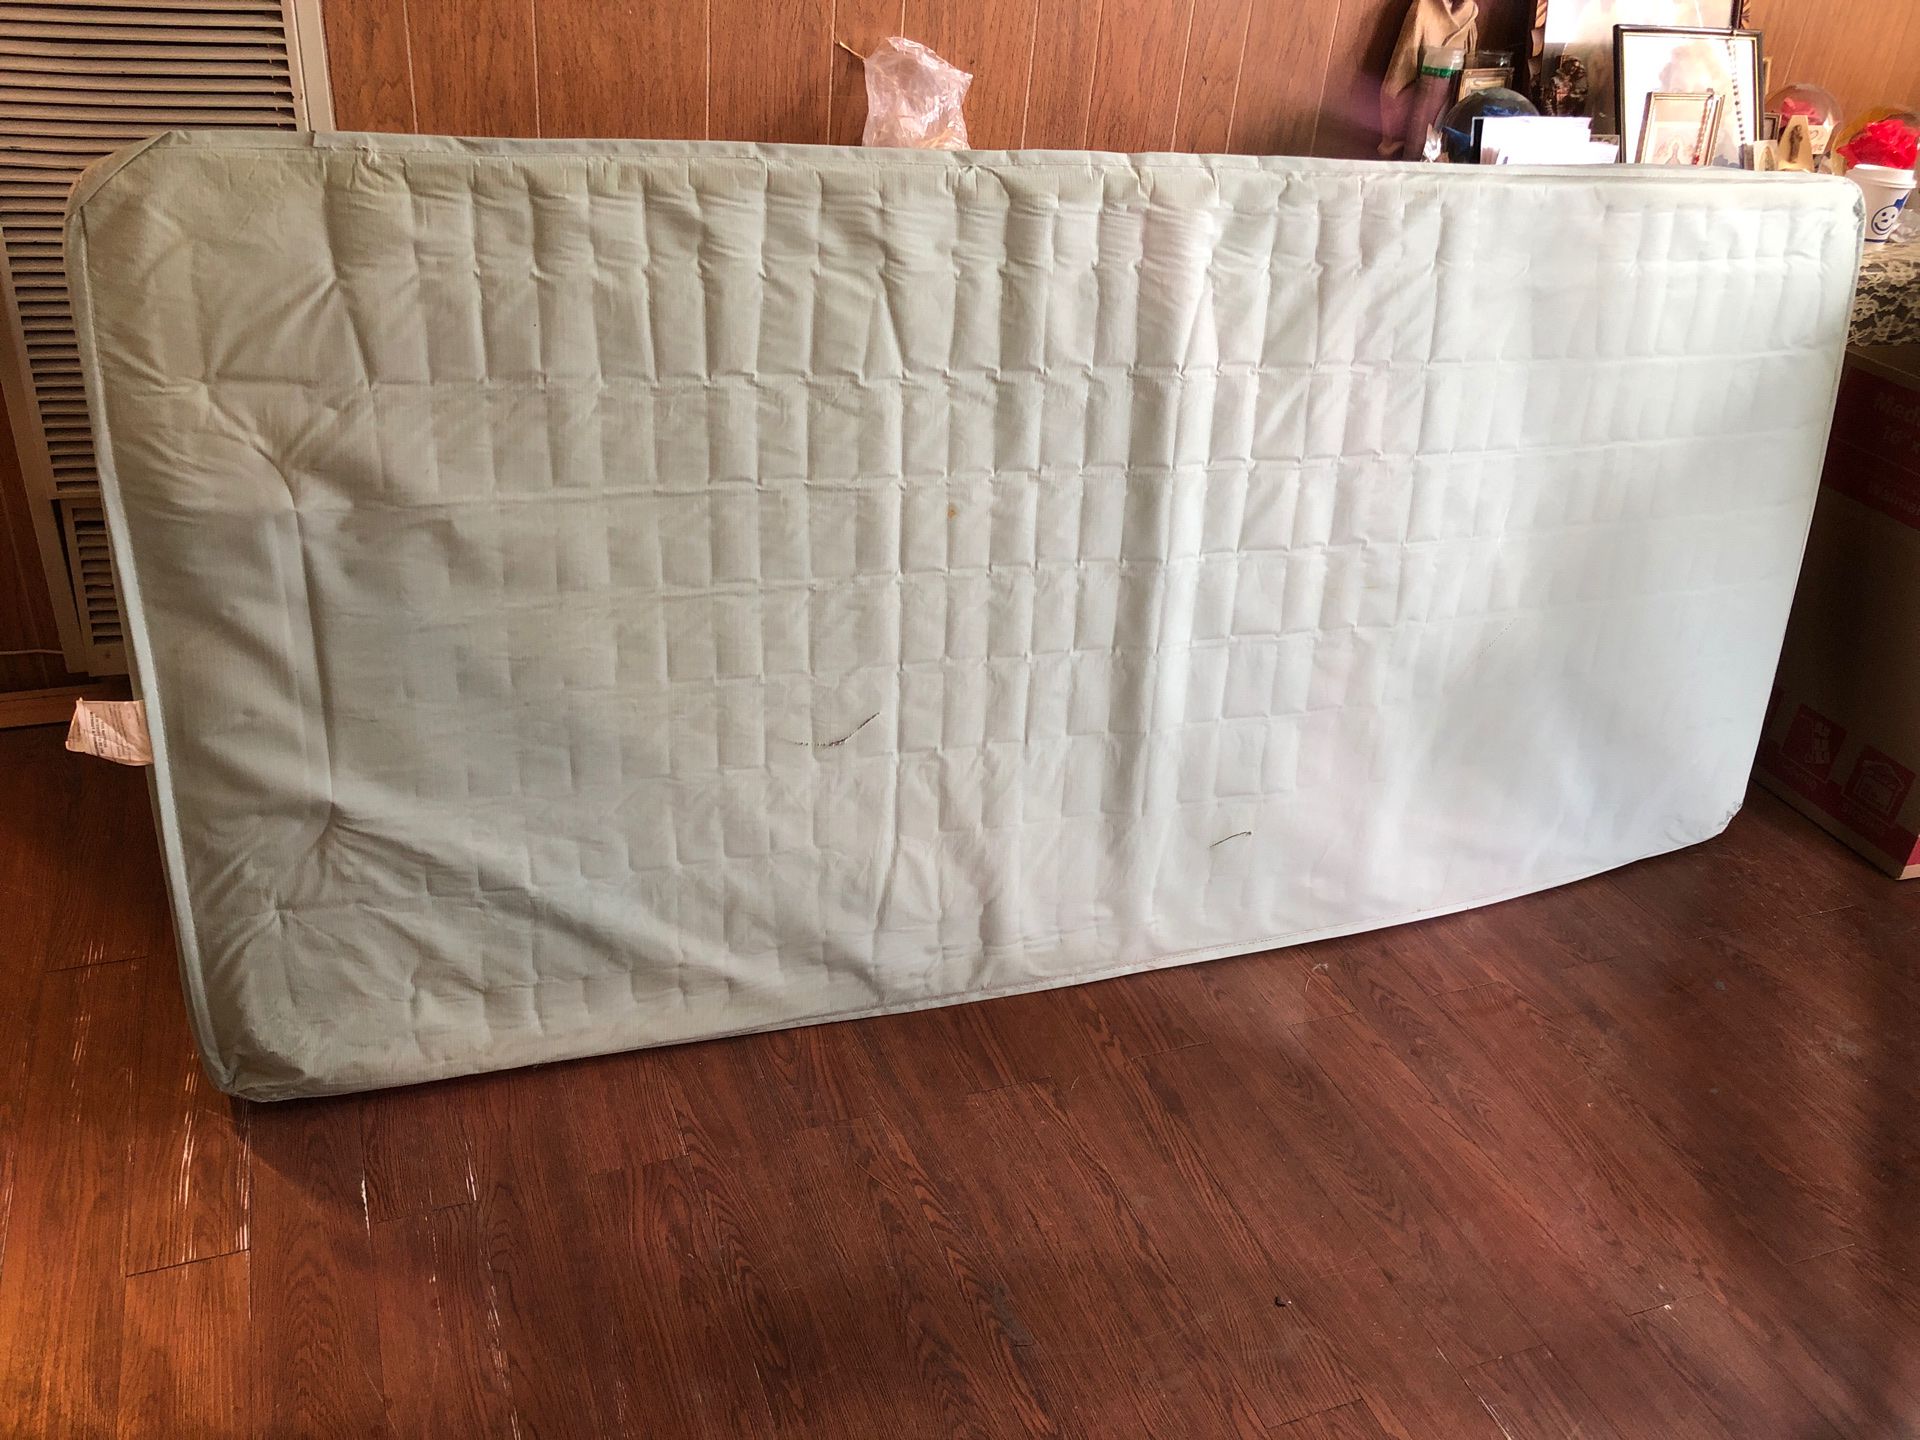 Twin bed mattress (plastic covering).